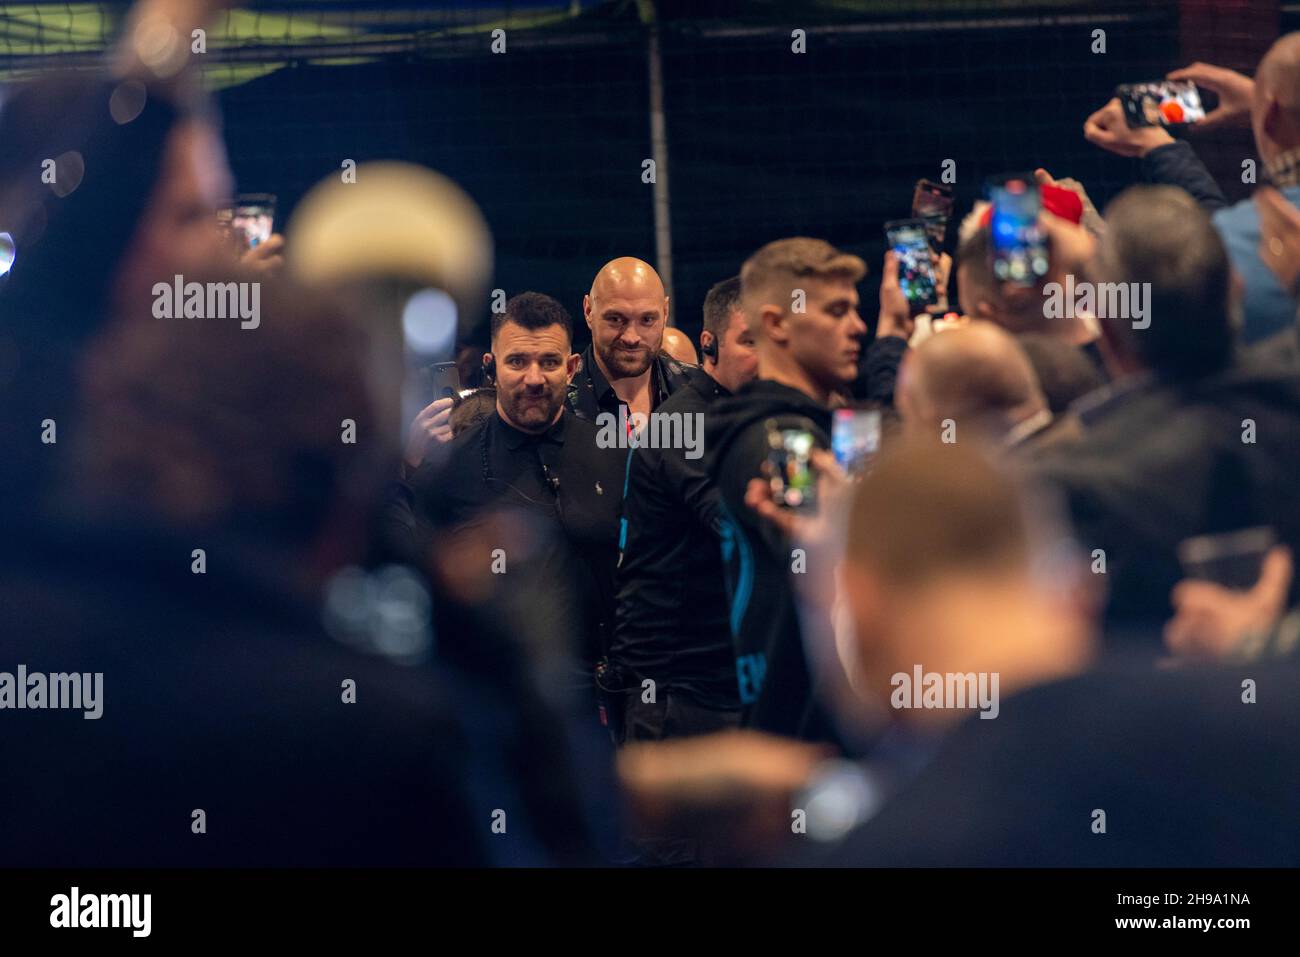 Cardiff, Wales, 5/12/21: Tyson Fury Gipsy King Homecoming Party, Cardiff Vale Sports Arena, Cardiff, Wales, 5/12/21: PIC by Andrew Dowling Photography/Alamy Live News Stockfoto